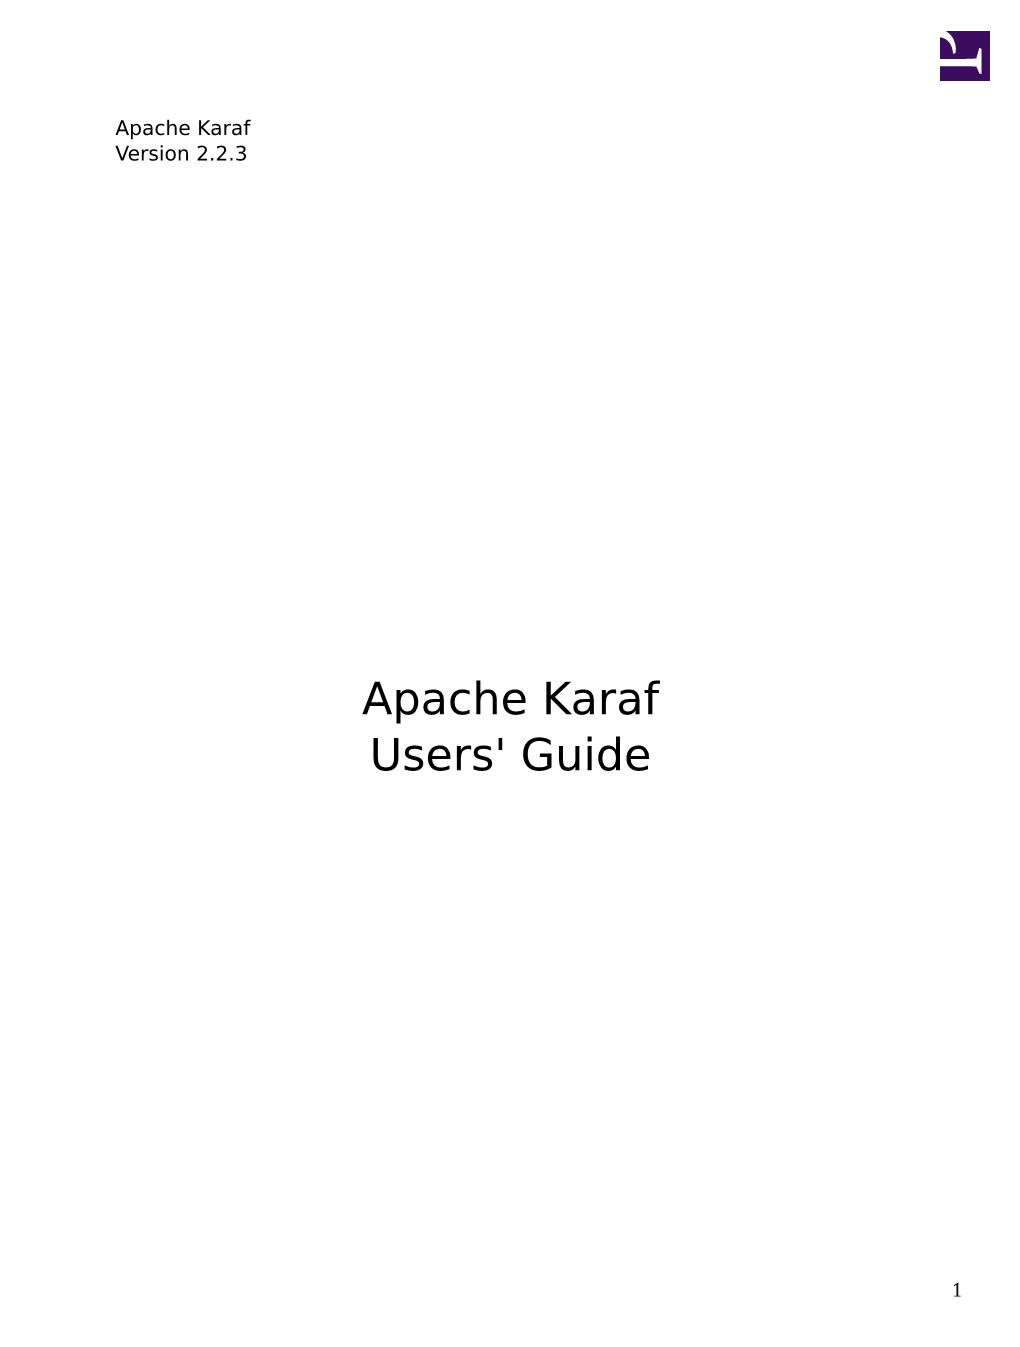 Apache Karaf 2.2.3, the Transitive Dependencies for This POM and the Bundles Listed in Src/Main/Resources/ Bundles.Properties